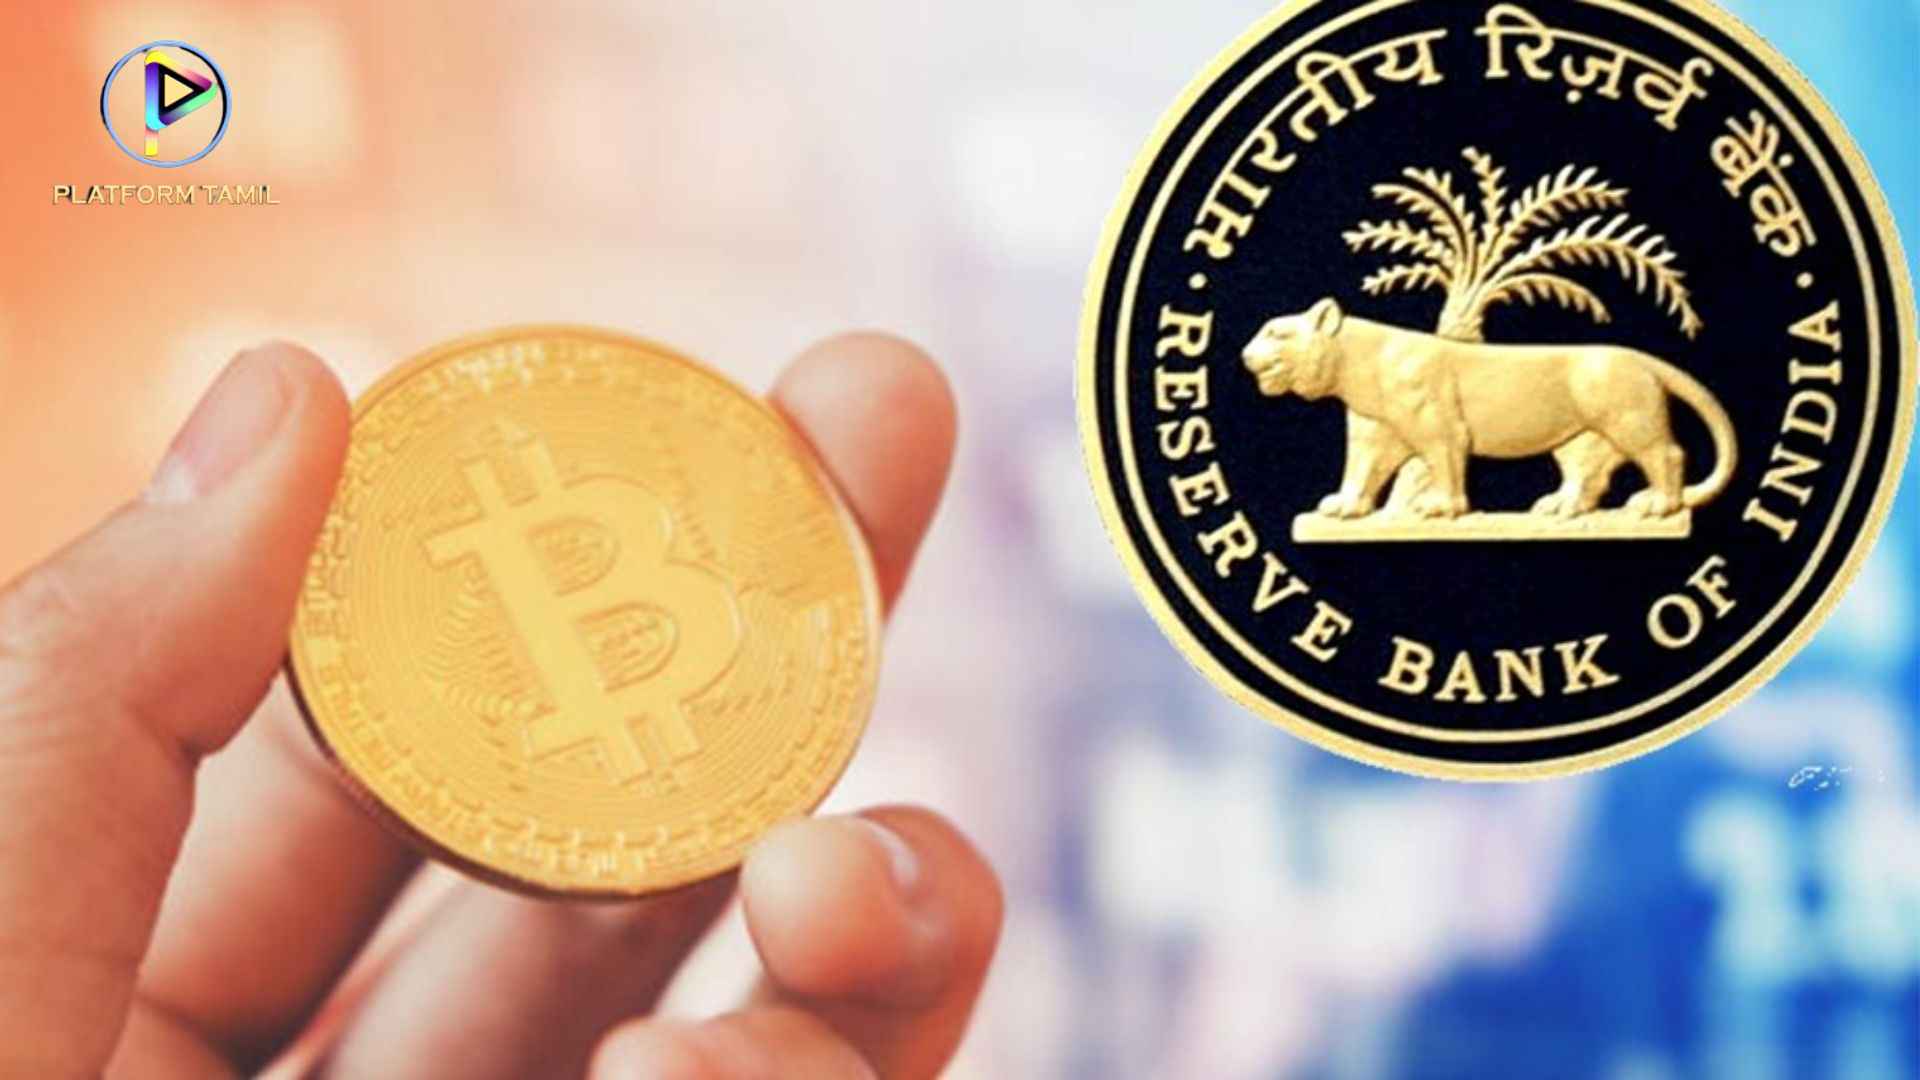 India Launches Digital Currency - Platformtamil